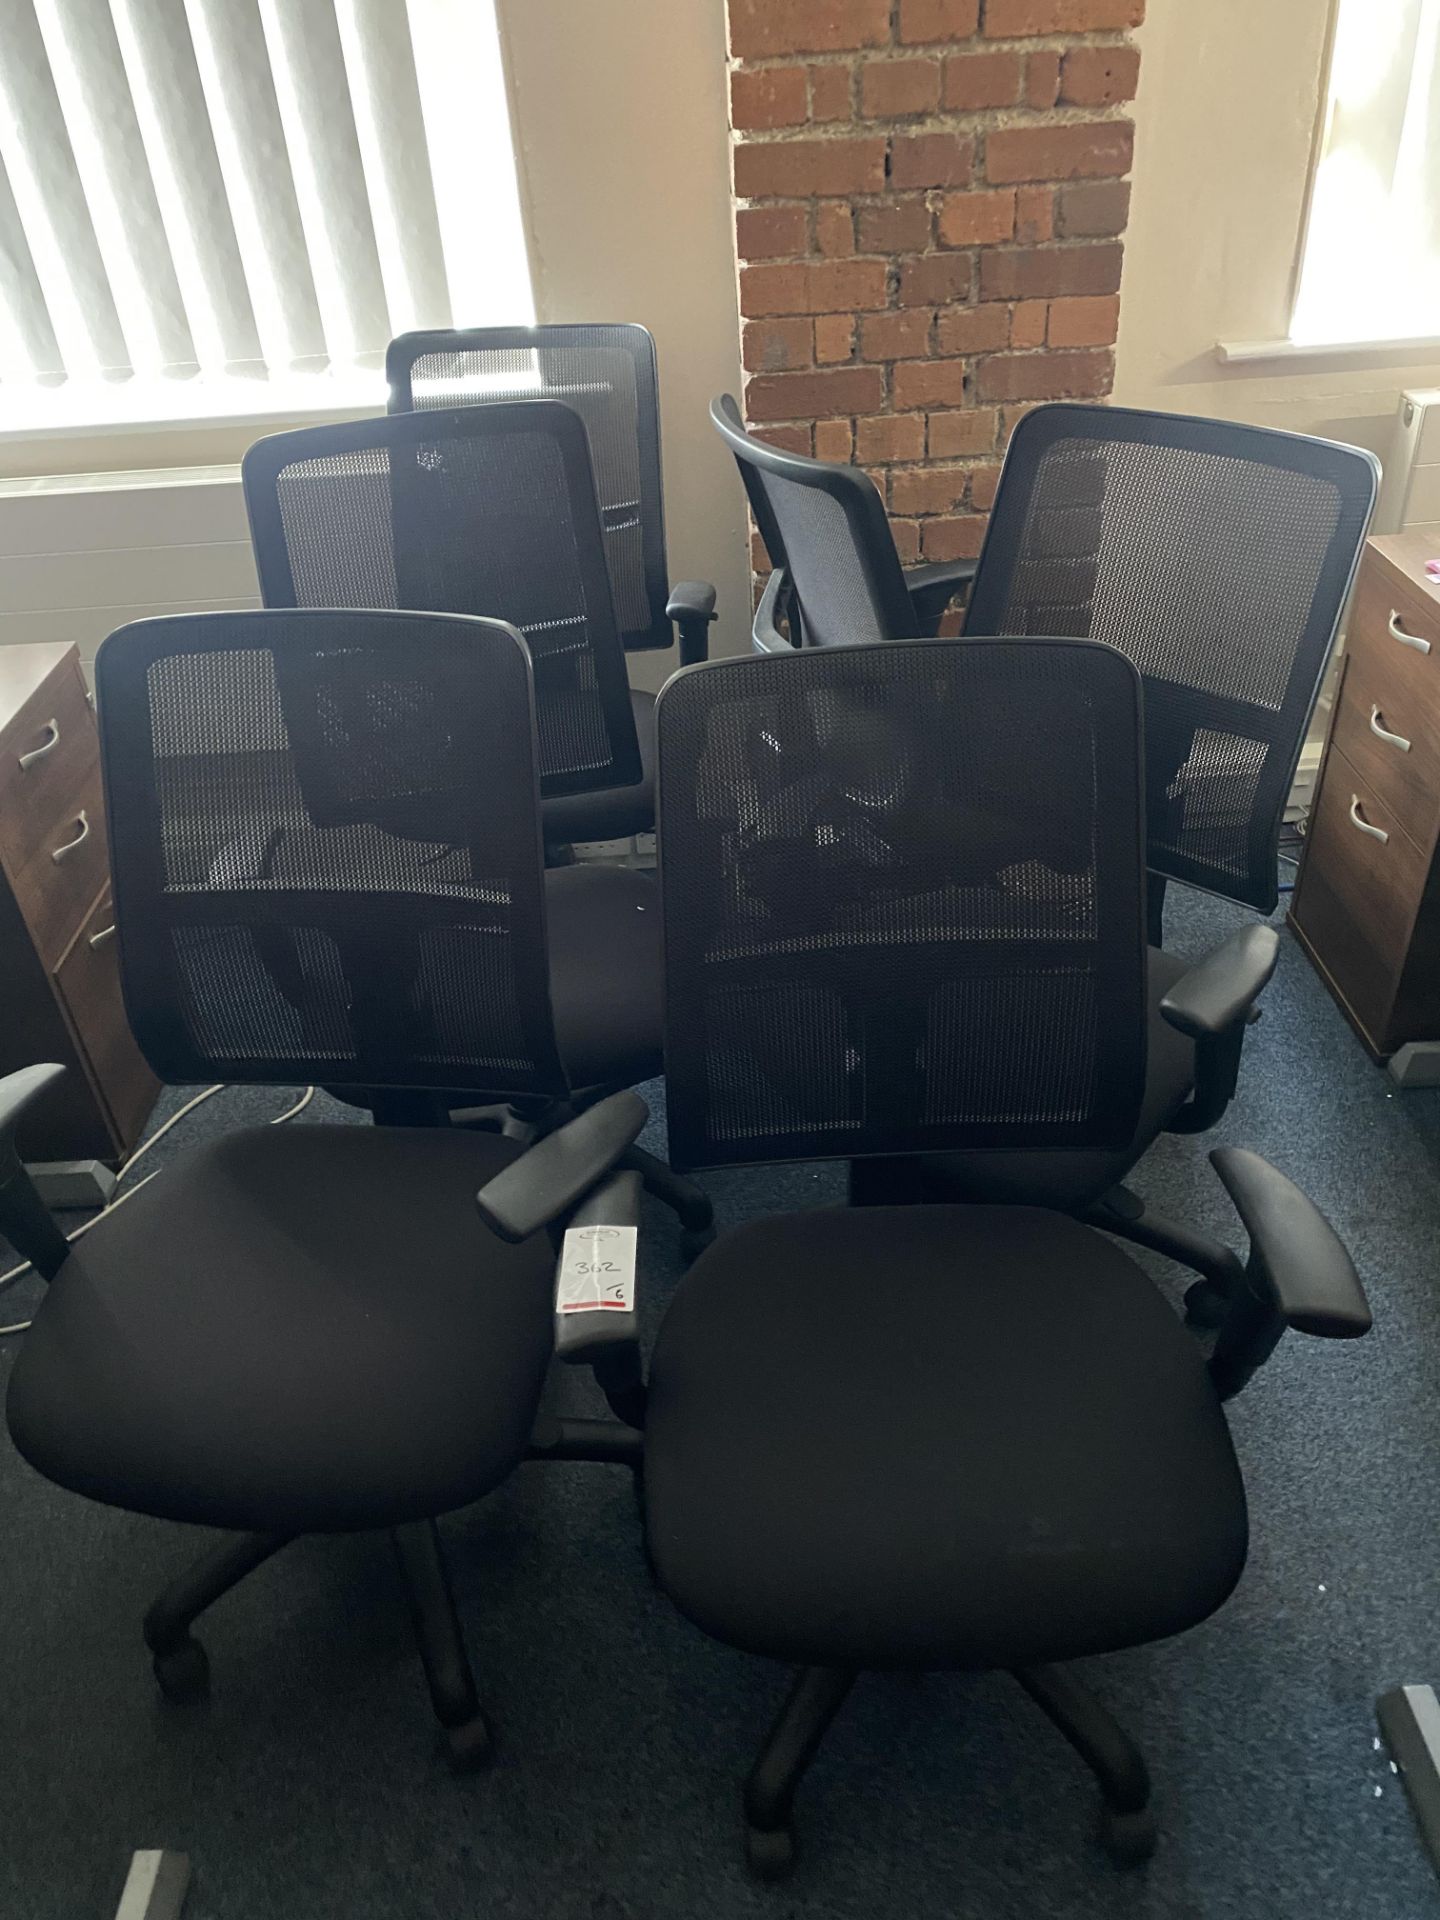 6 Black mesh back office chairs